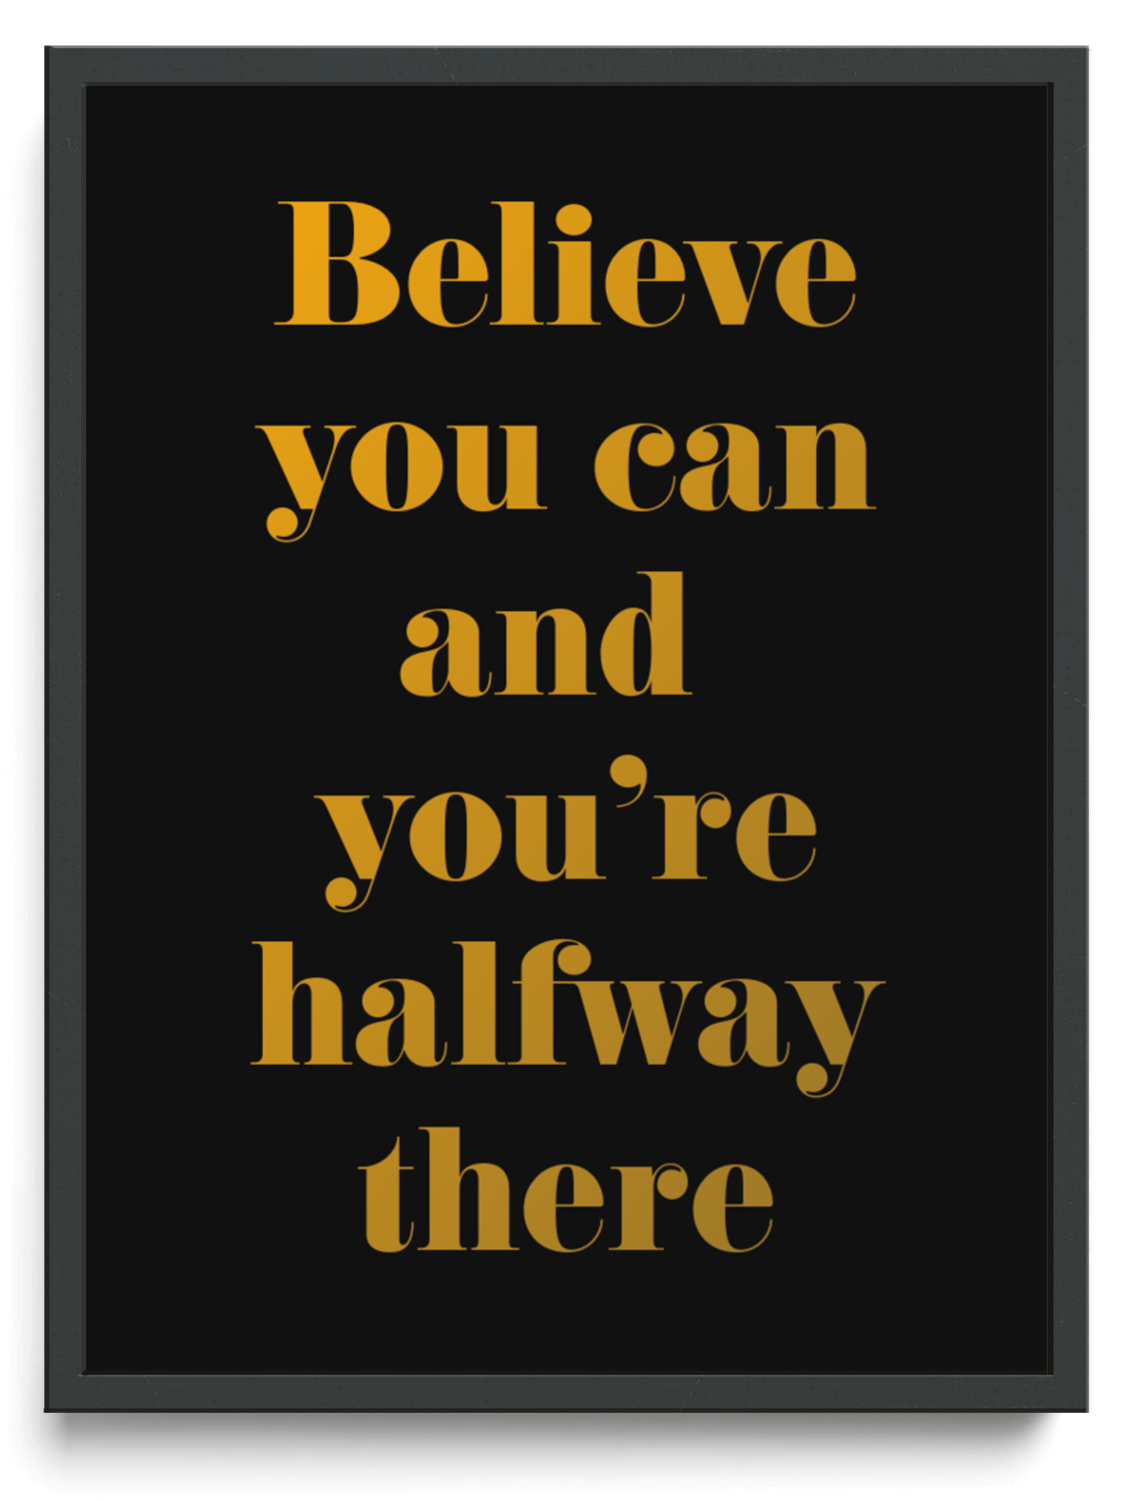 Believe you can and youre halfway there framed typographic print